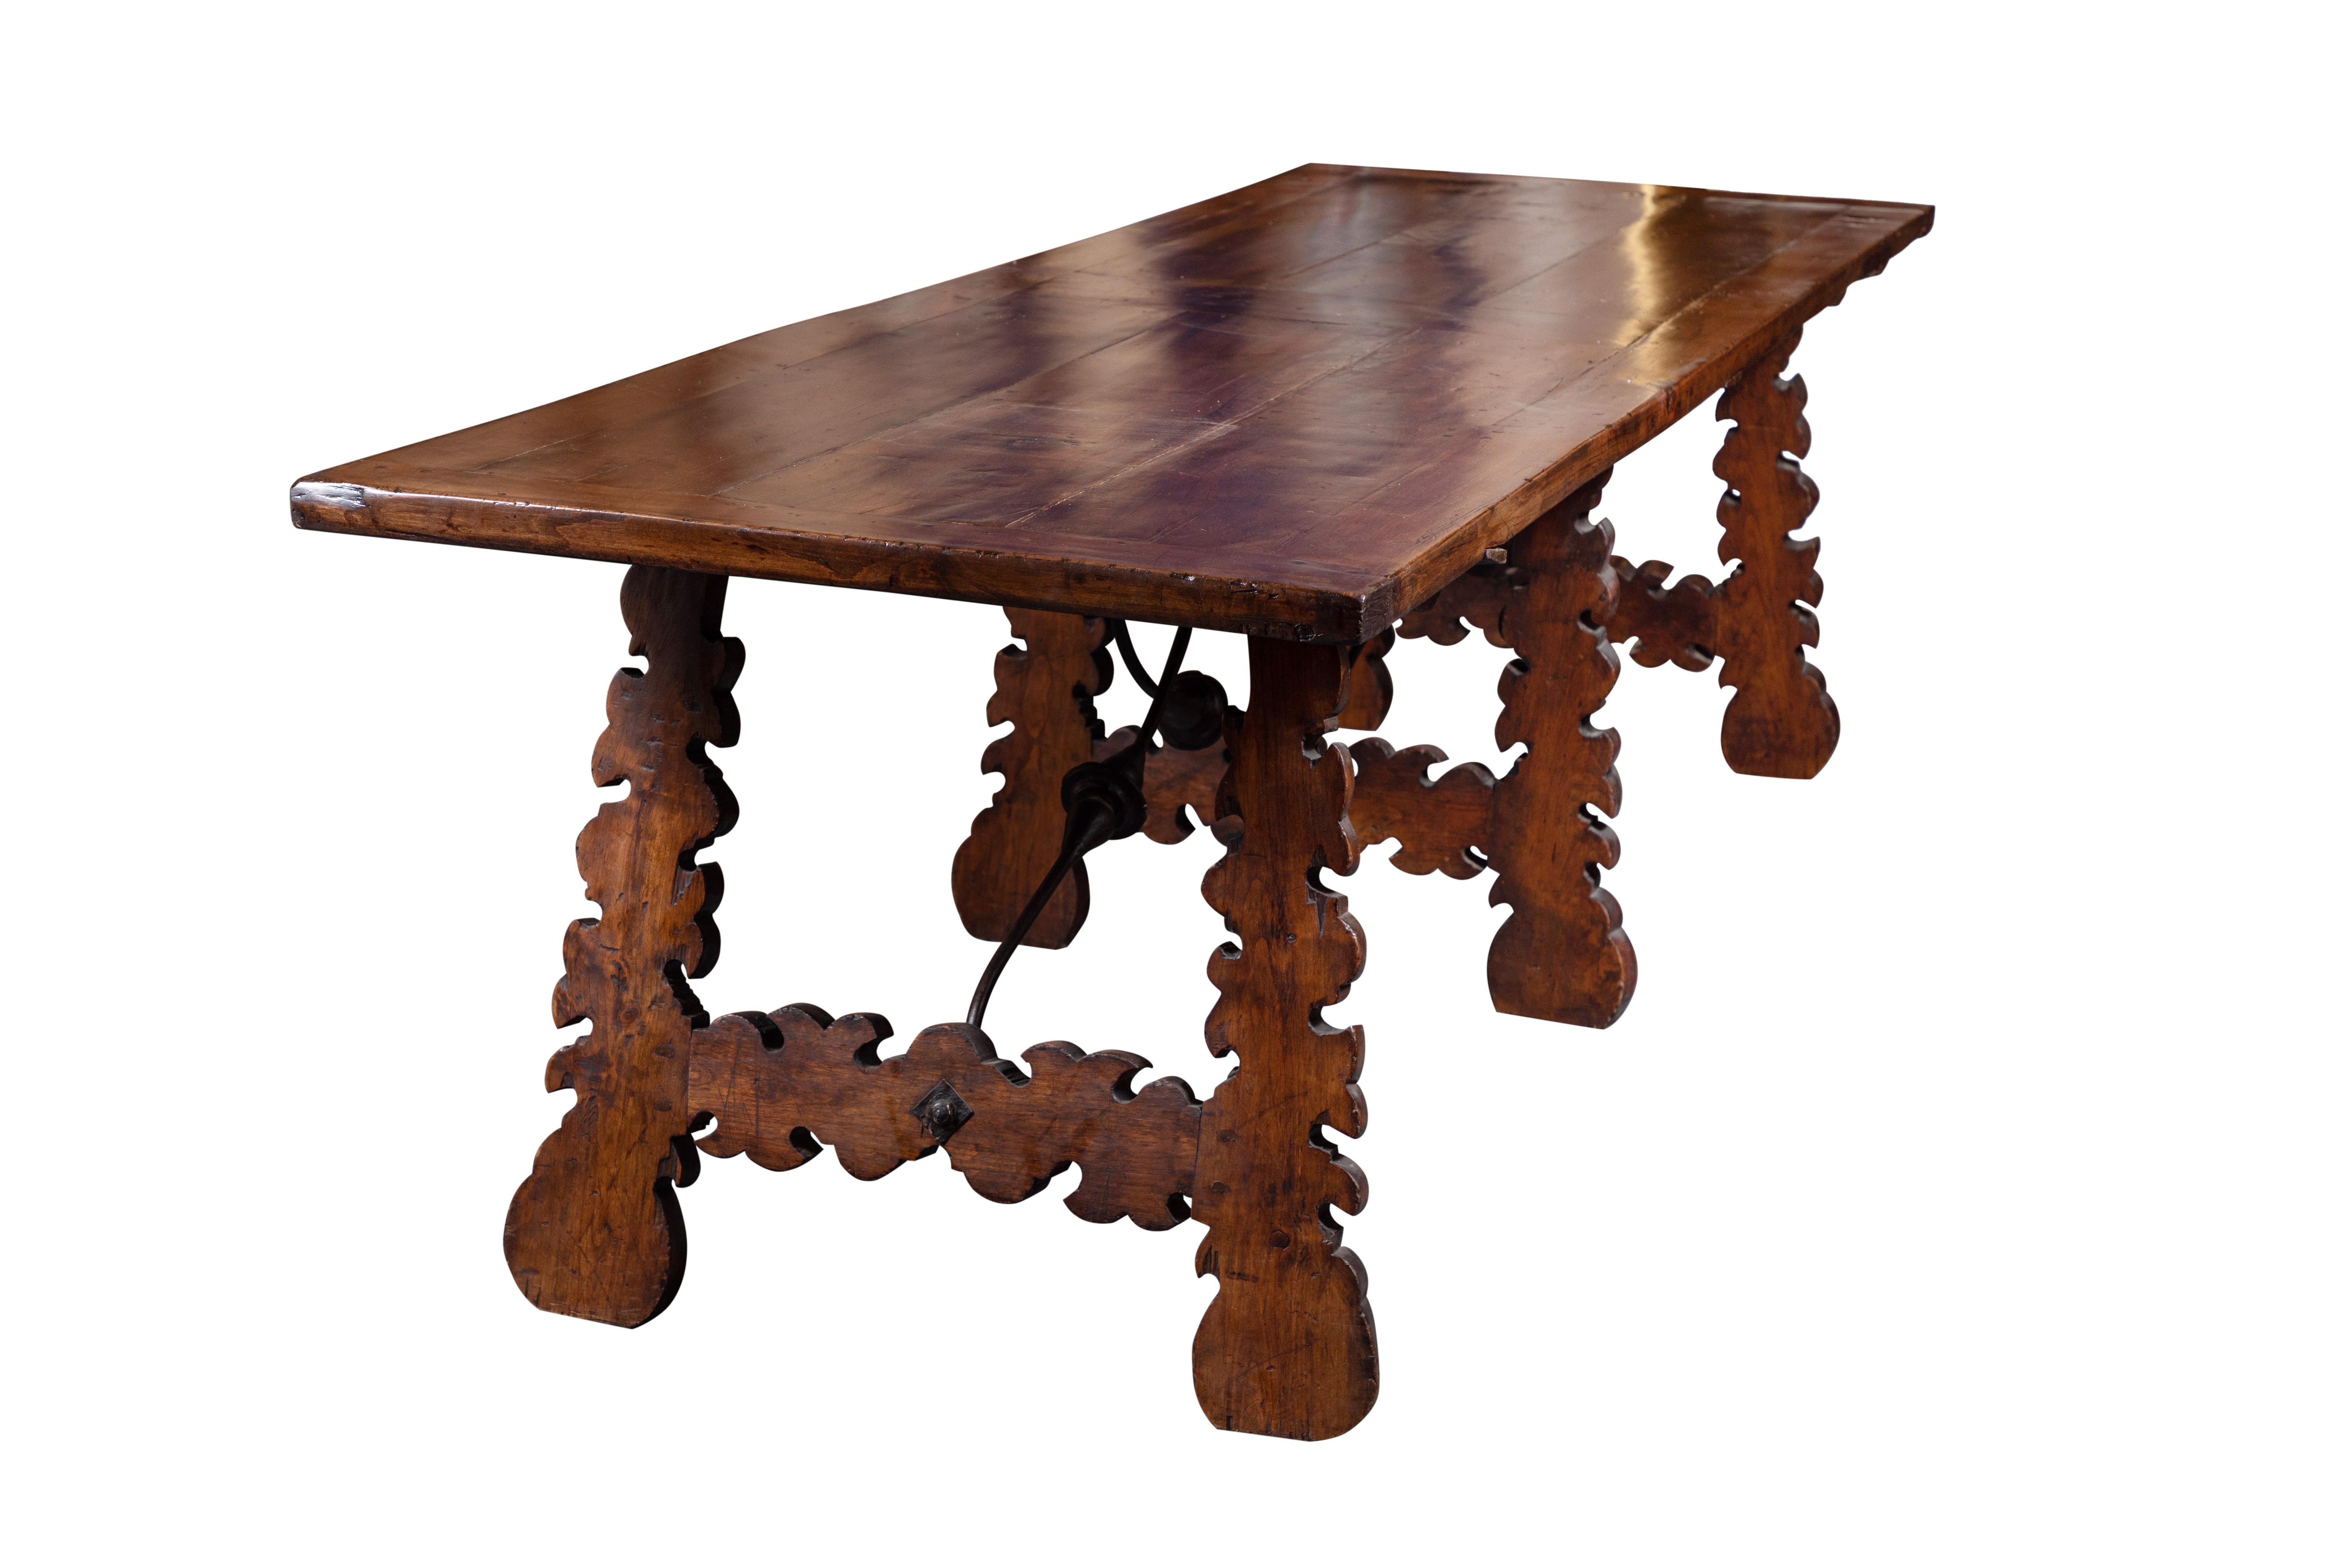 Carved walnut dining table featuring a hand forged, wrought iron stretcher and three sets of undulating trestles.